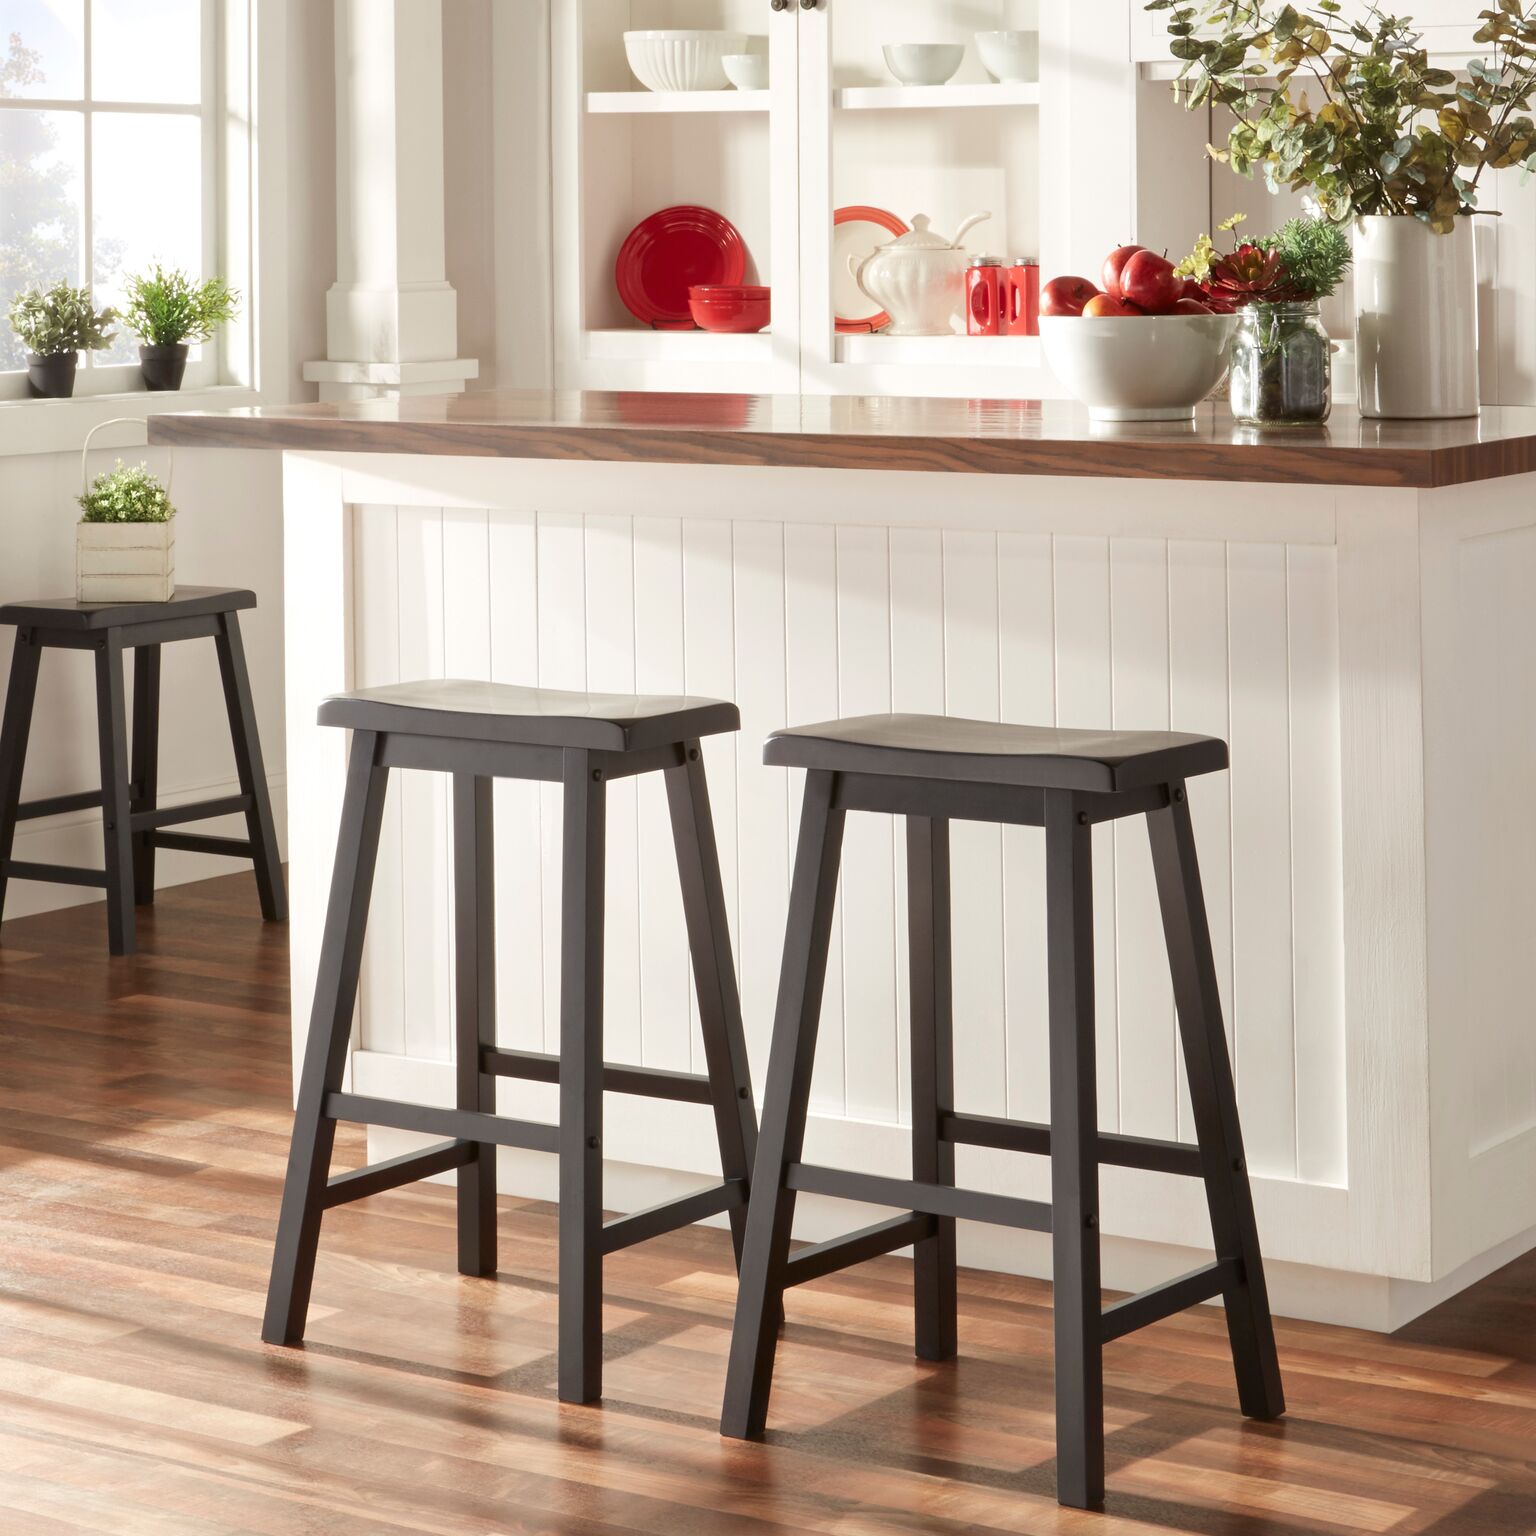 Saddle Seat 29-inch Bar Height Backless Stools (Set of 2)